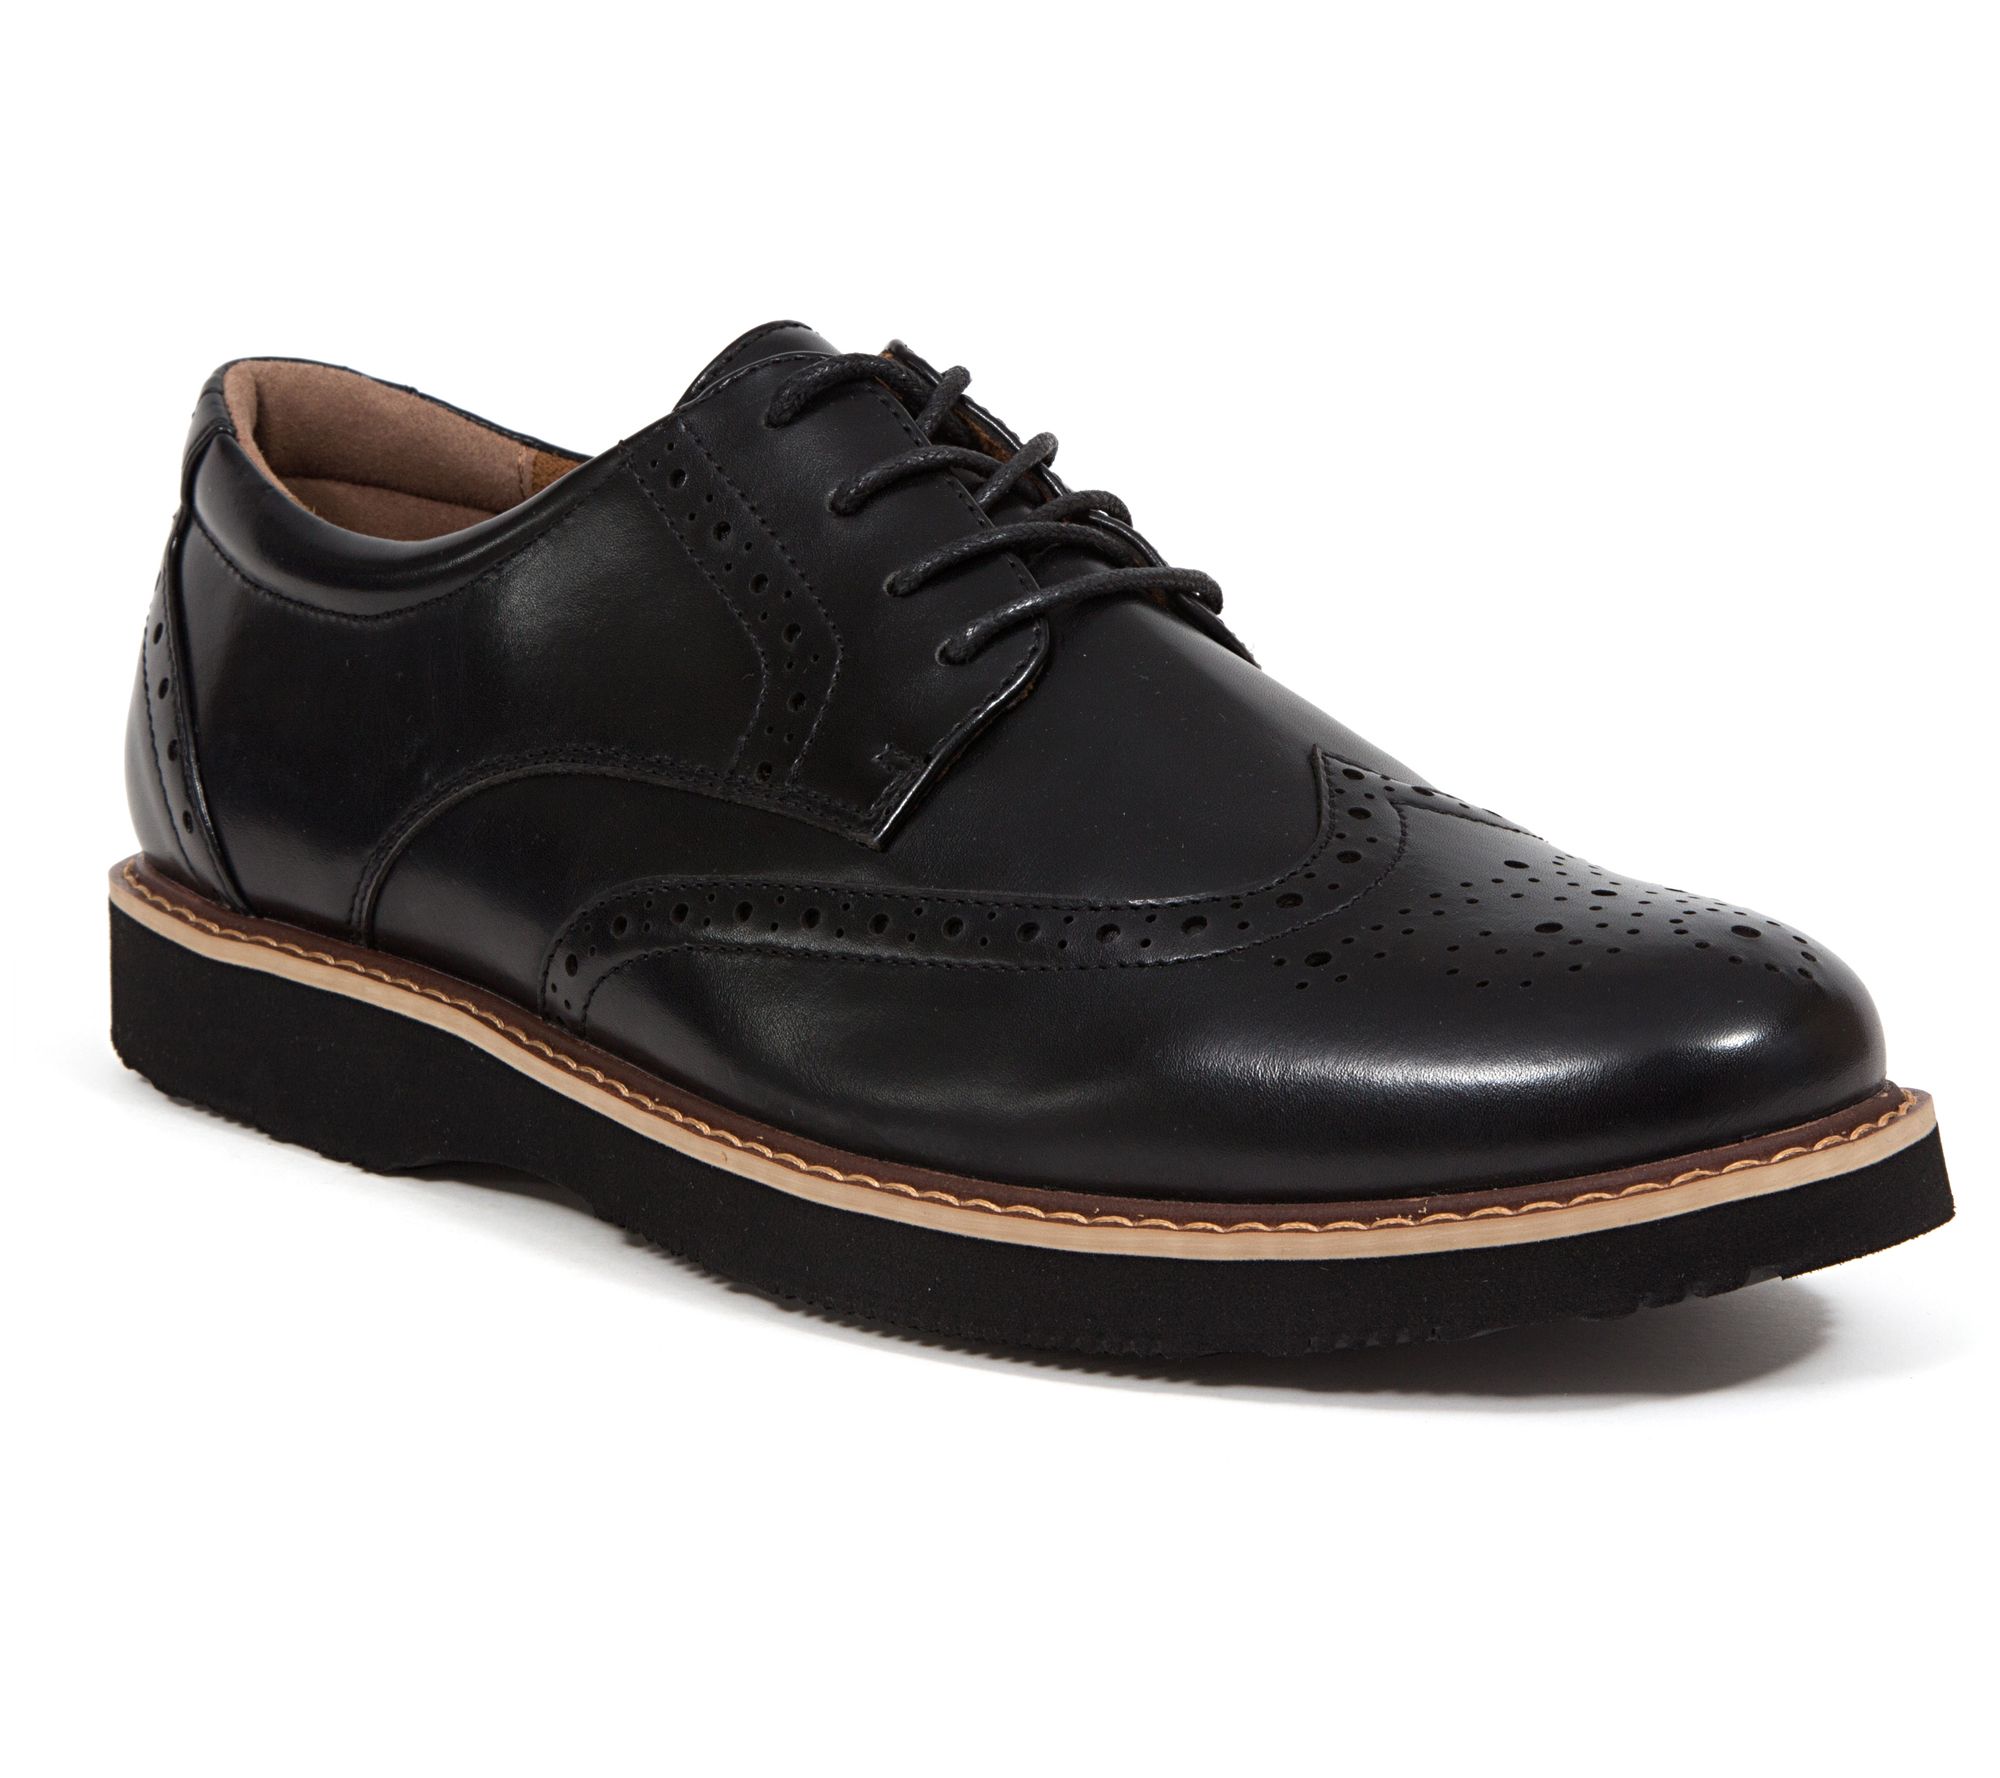 Mens Formal Shoes (फॉर्मल शूज) - Upto 50% to 80% OFF on